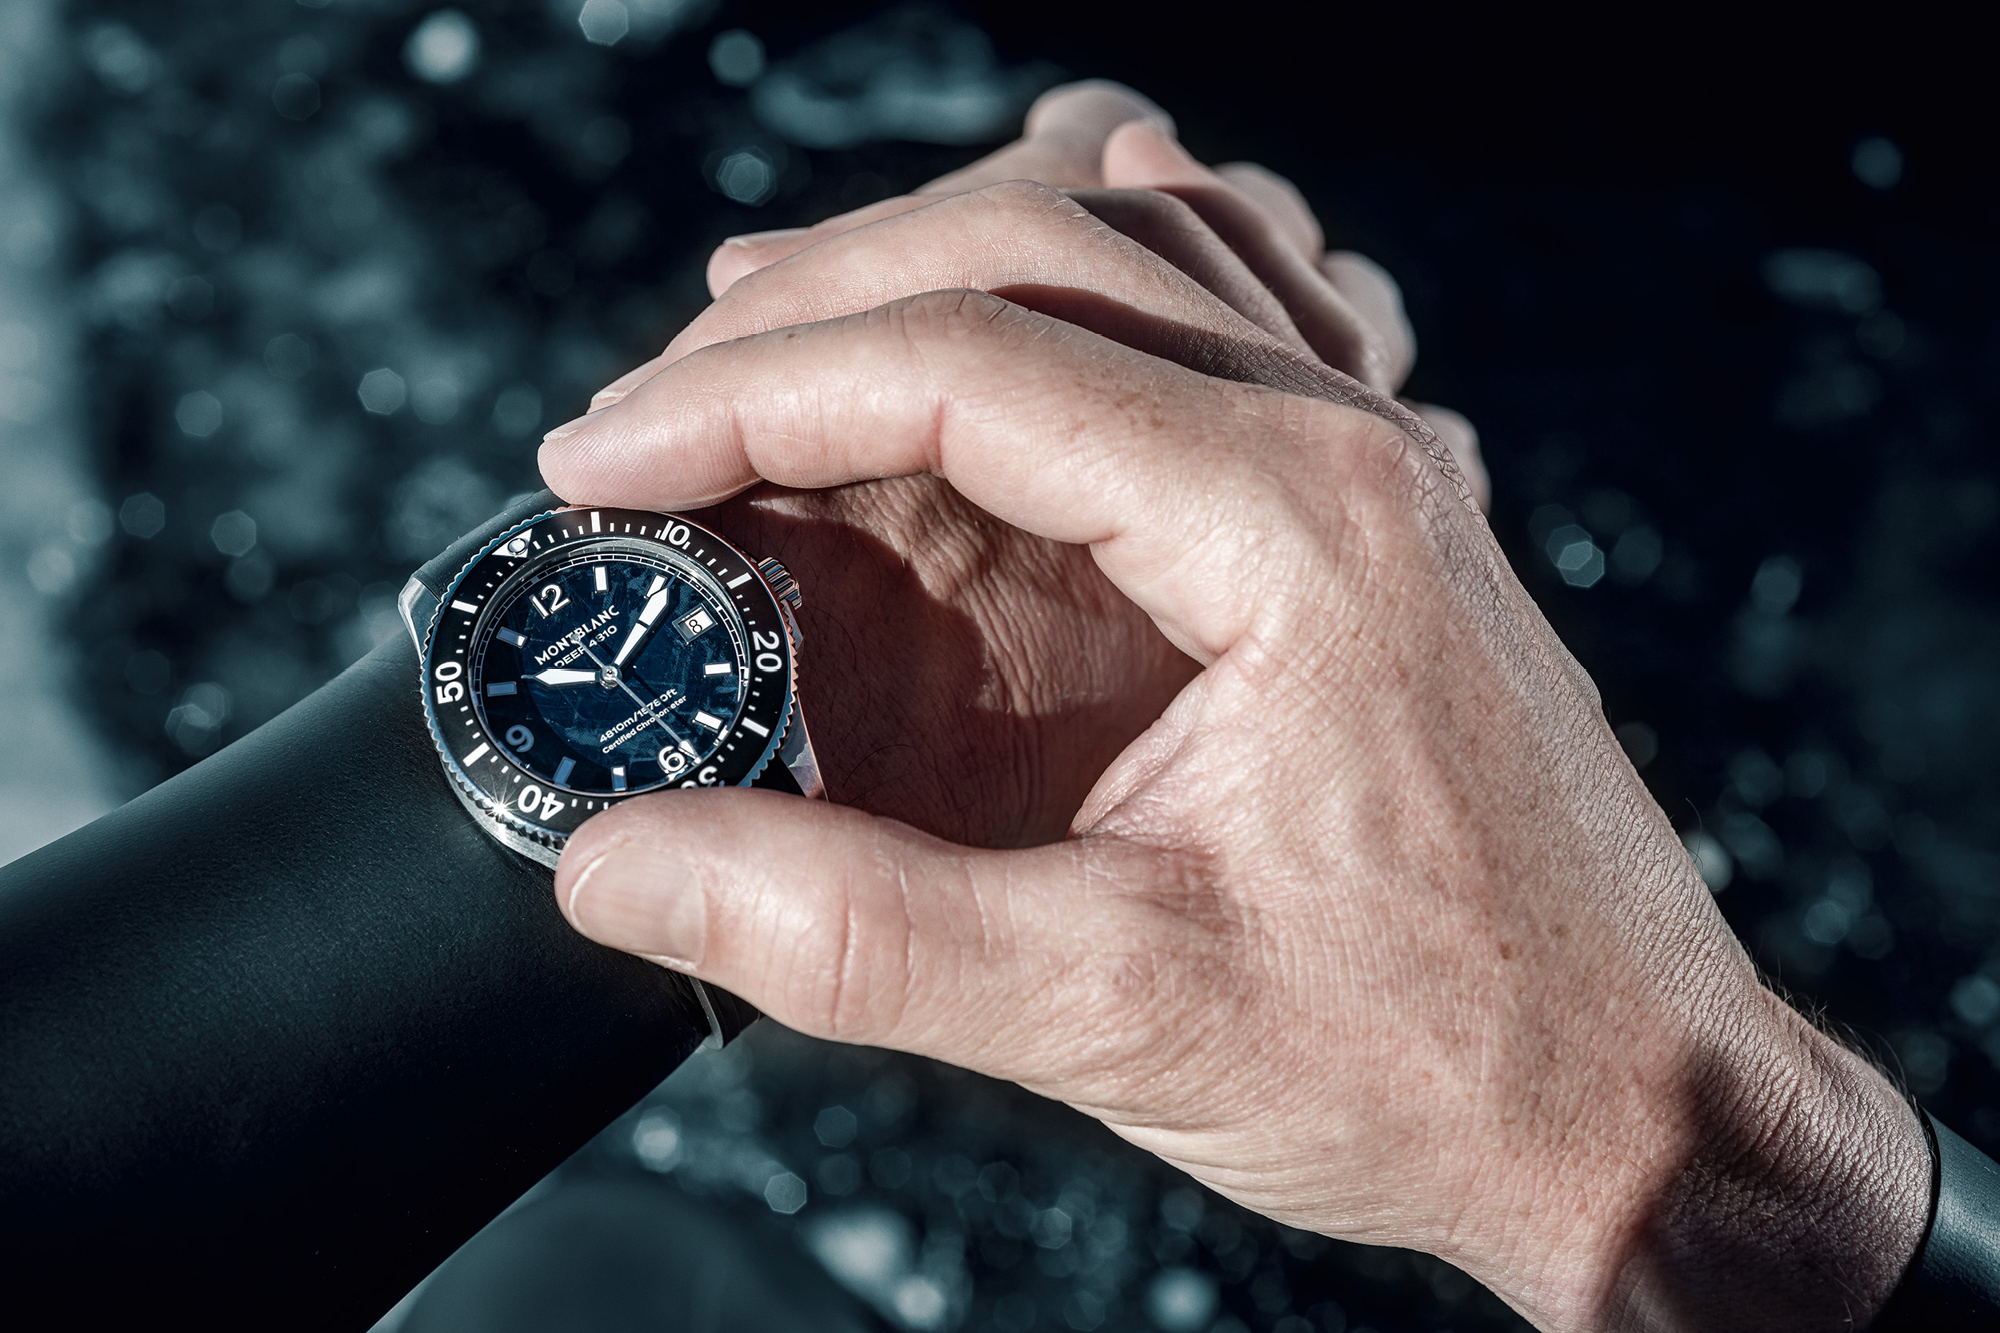 The Montblanc Iced Sea 0 Oxygen Deep 4810 is a highly versatile sports watch suited to a range of conditions and activities, from mountain climbing to deep sea diving